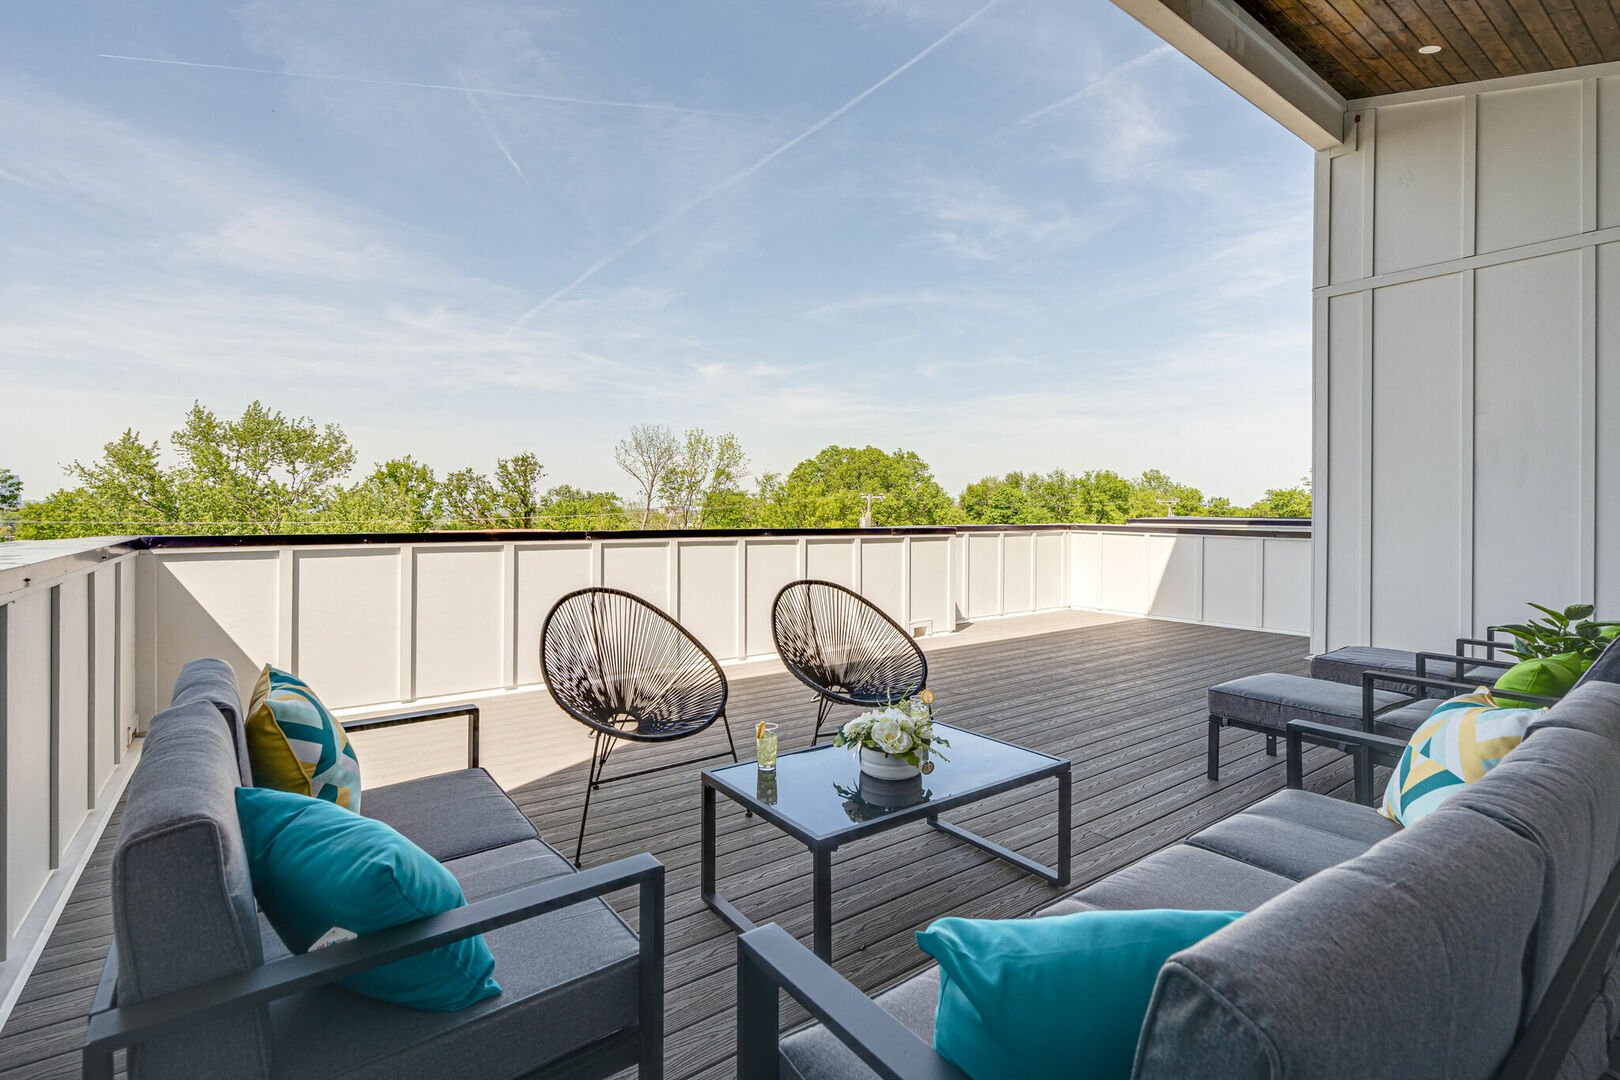 3rd Floor: Large private rooftop deck with multiple lounge areas that overlook the area and also includes sun loungers.